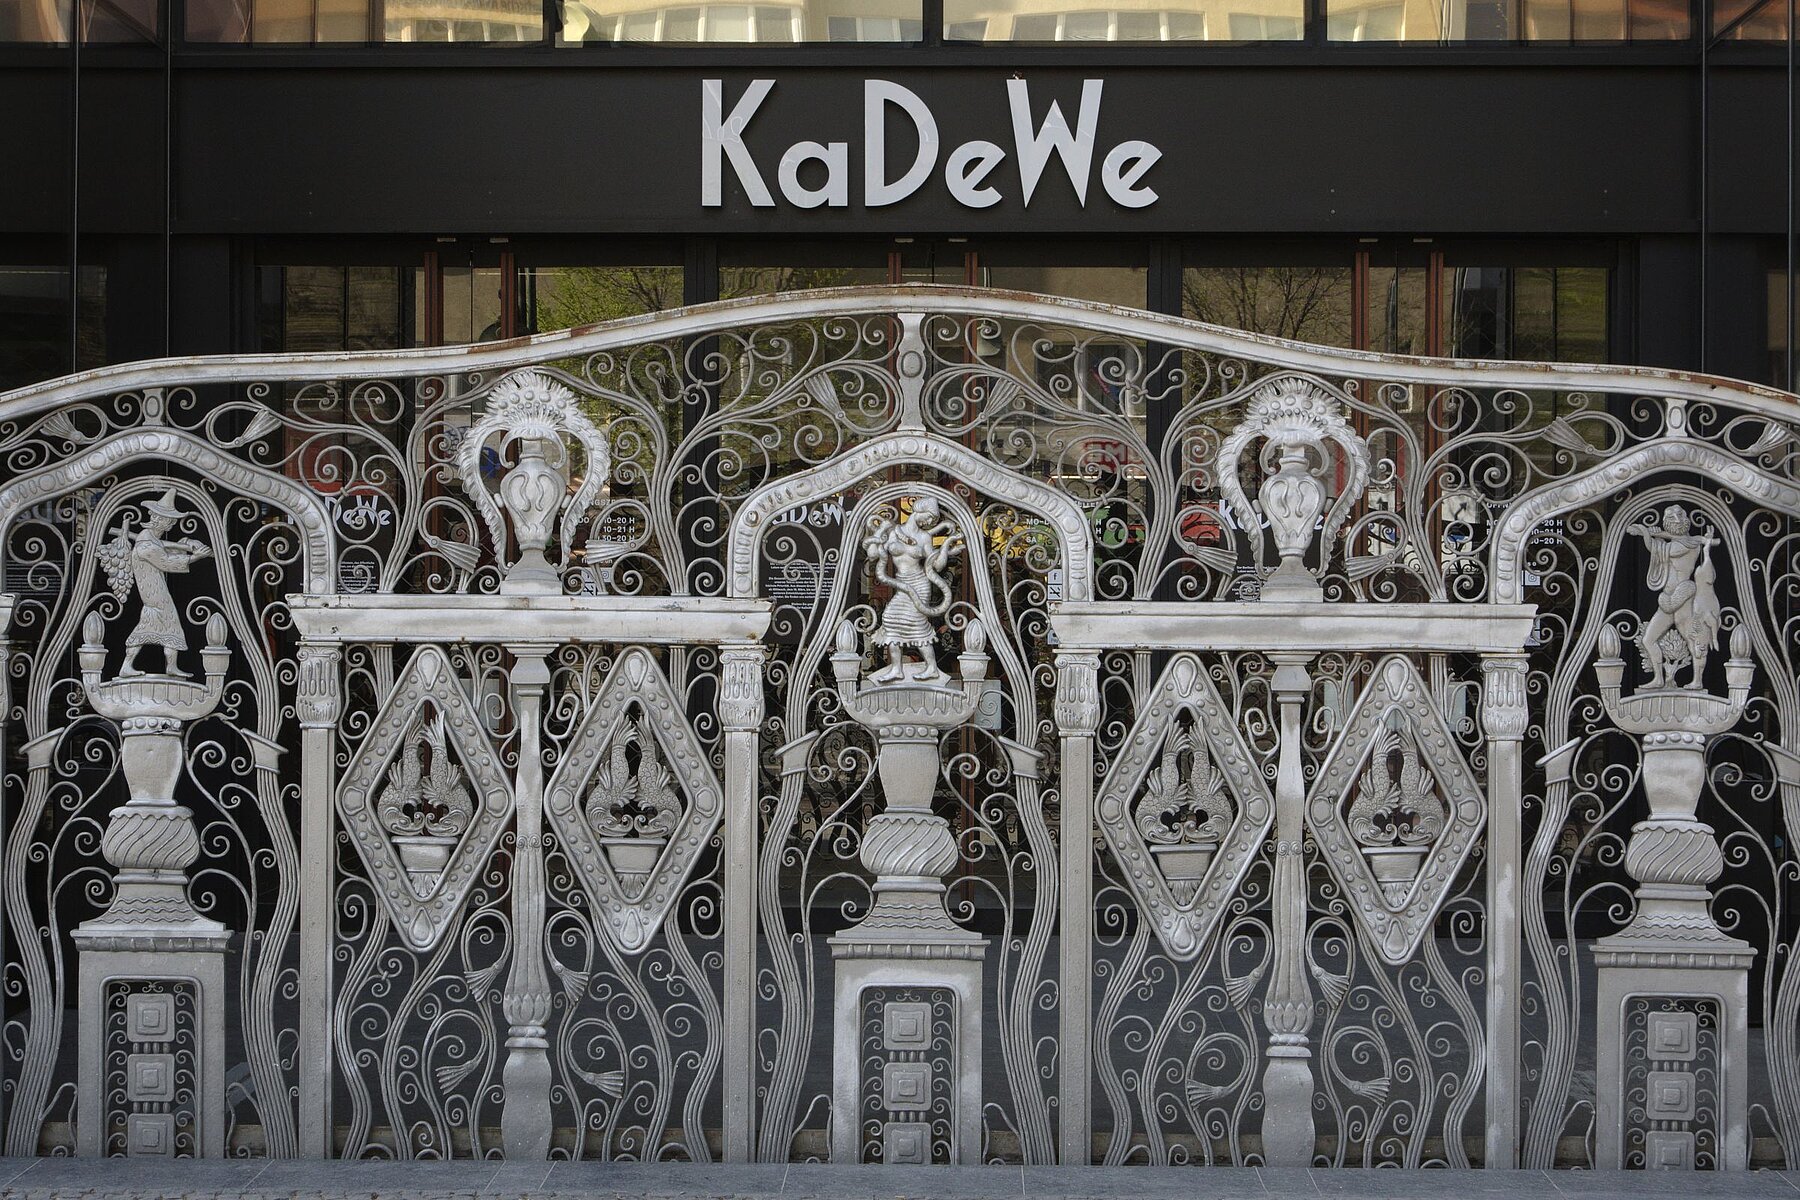 Cast-iron, silver-coloured gate with ornamental decorations. Above it hangs the KaDeWe lettering in white letters on a black background.